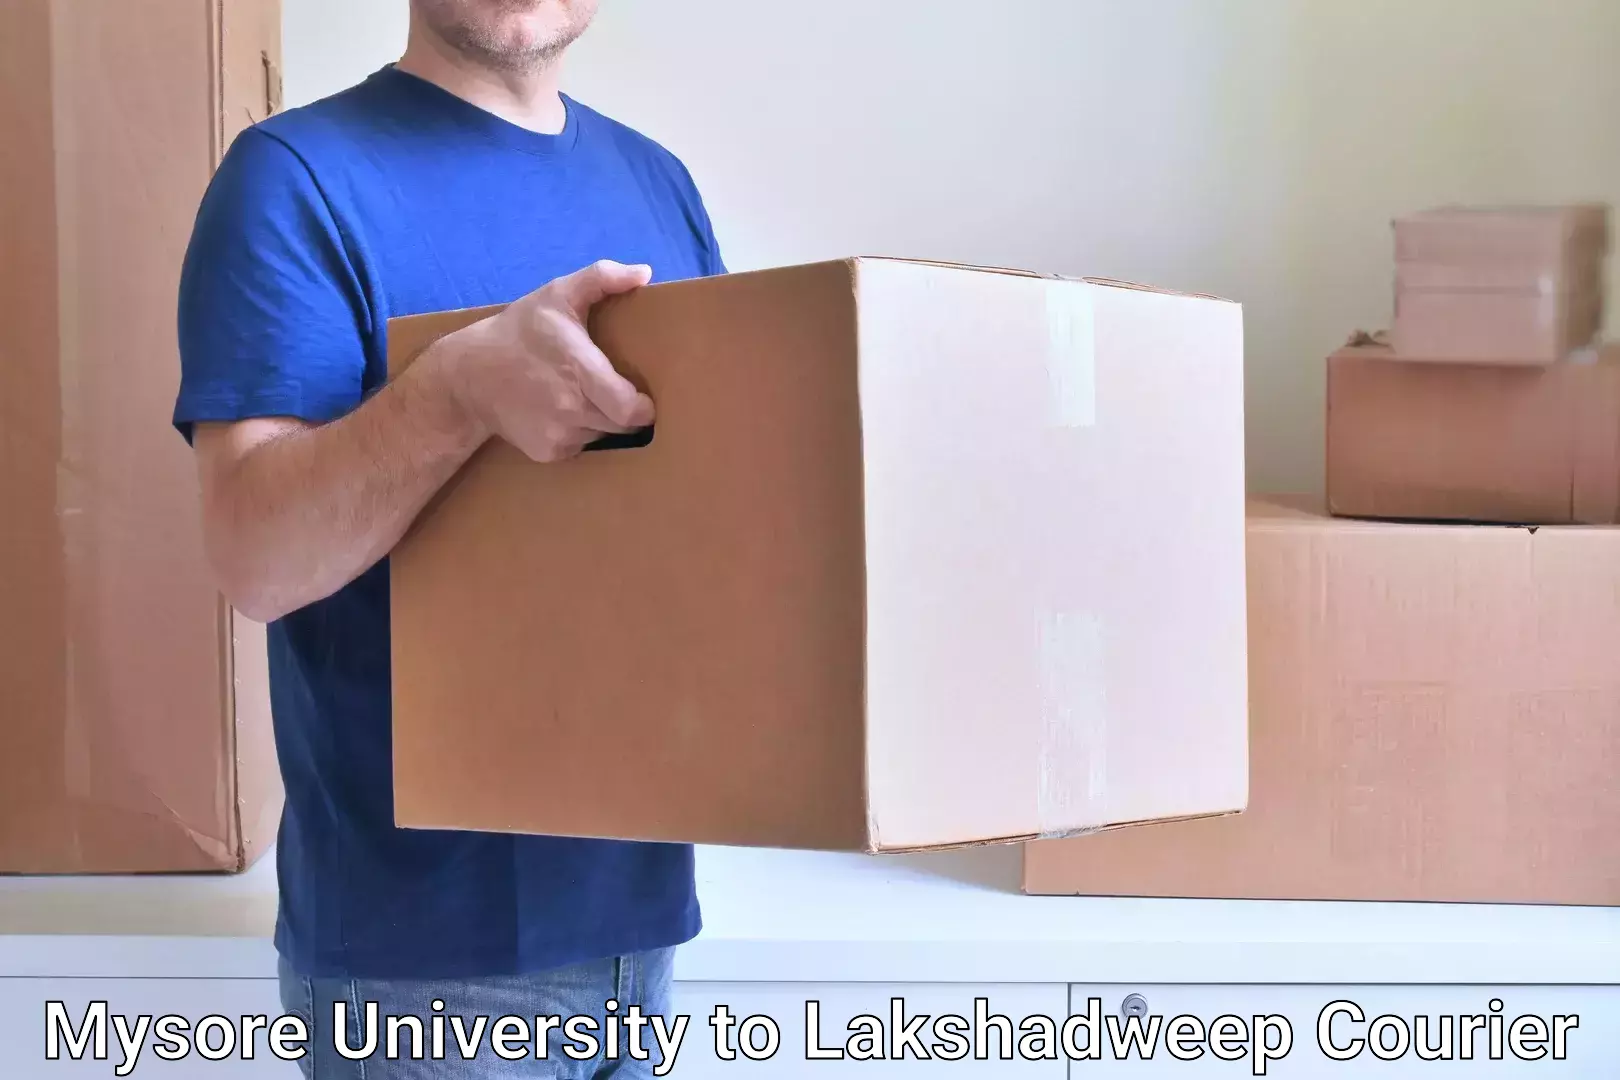 Efficient courier operations Mysore University to Lakshadweep